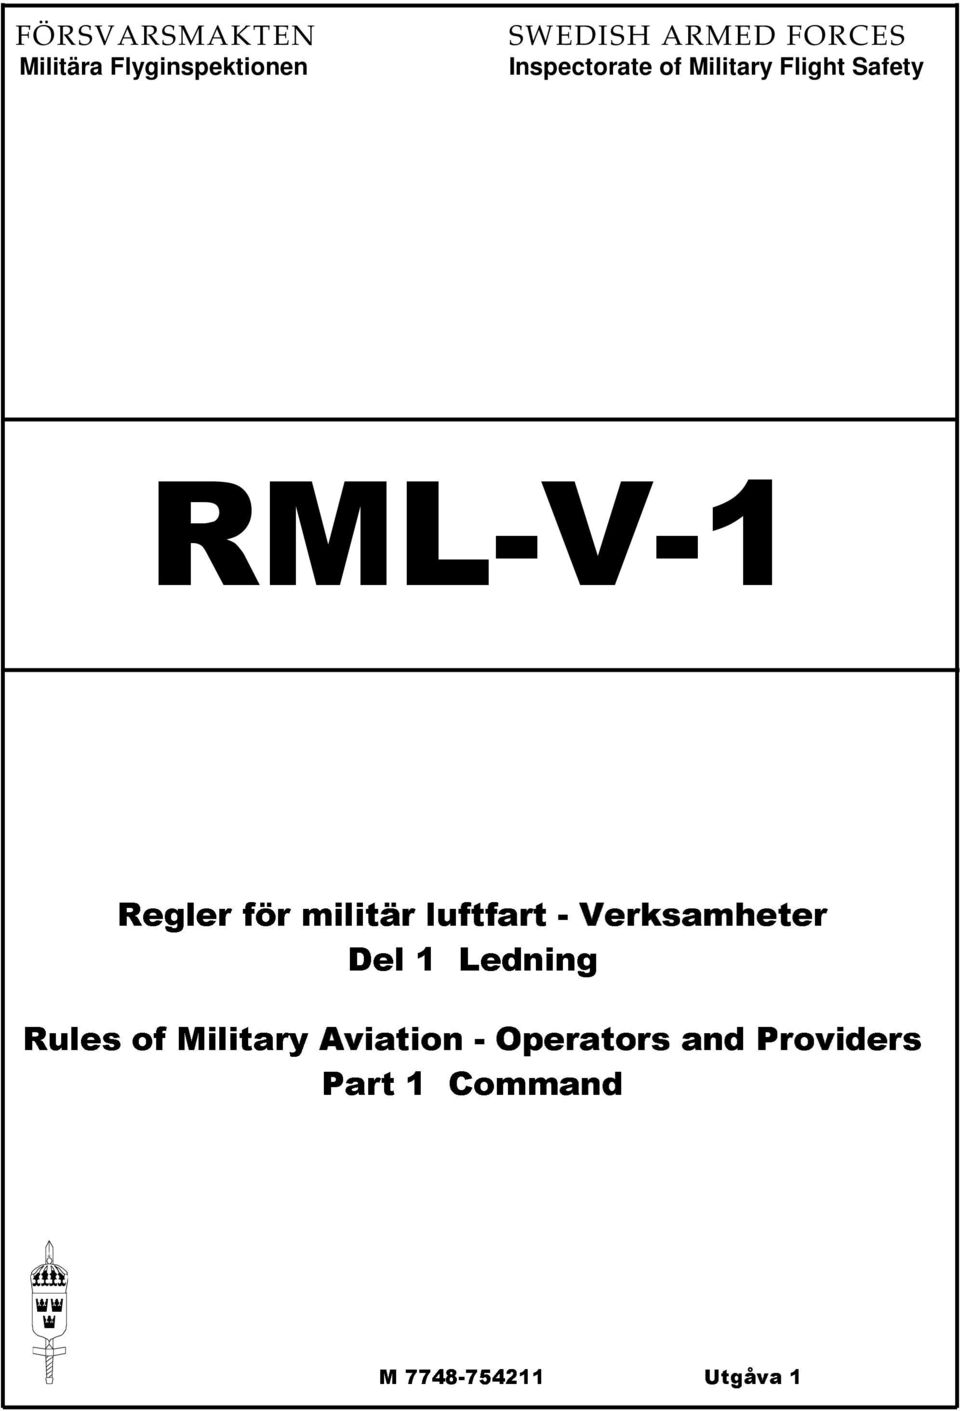 Rules of Military Aviation - Operators and